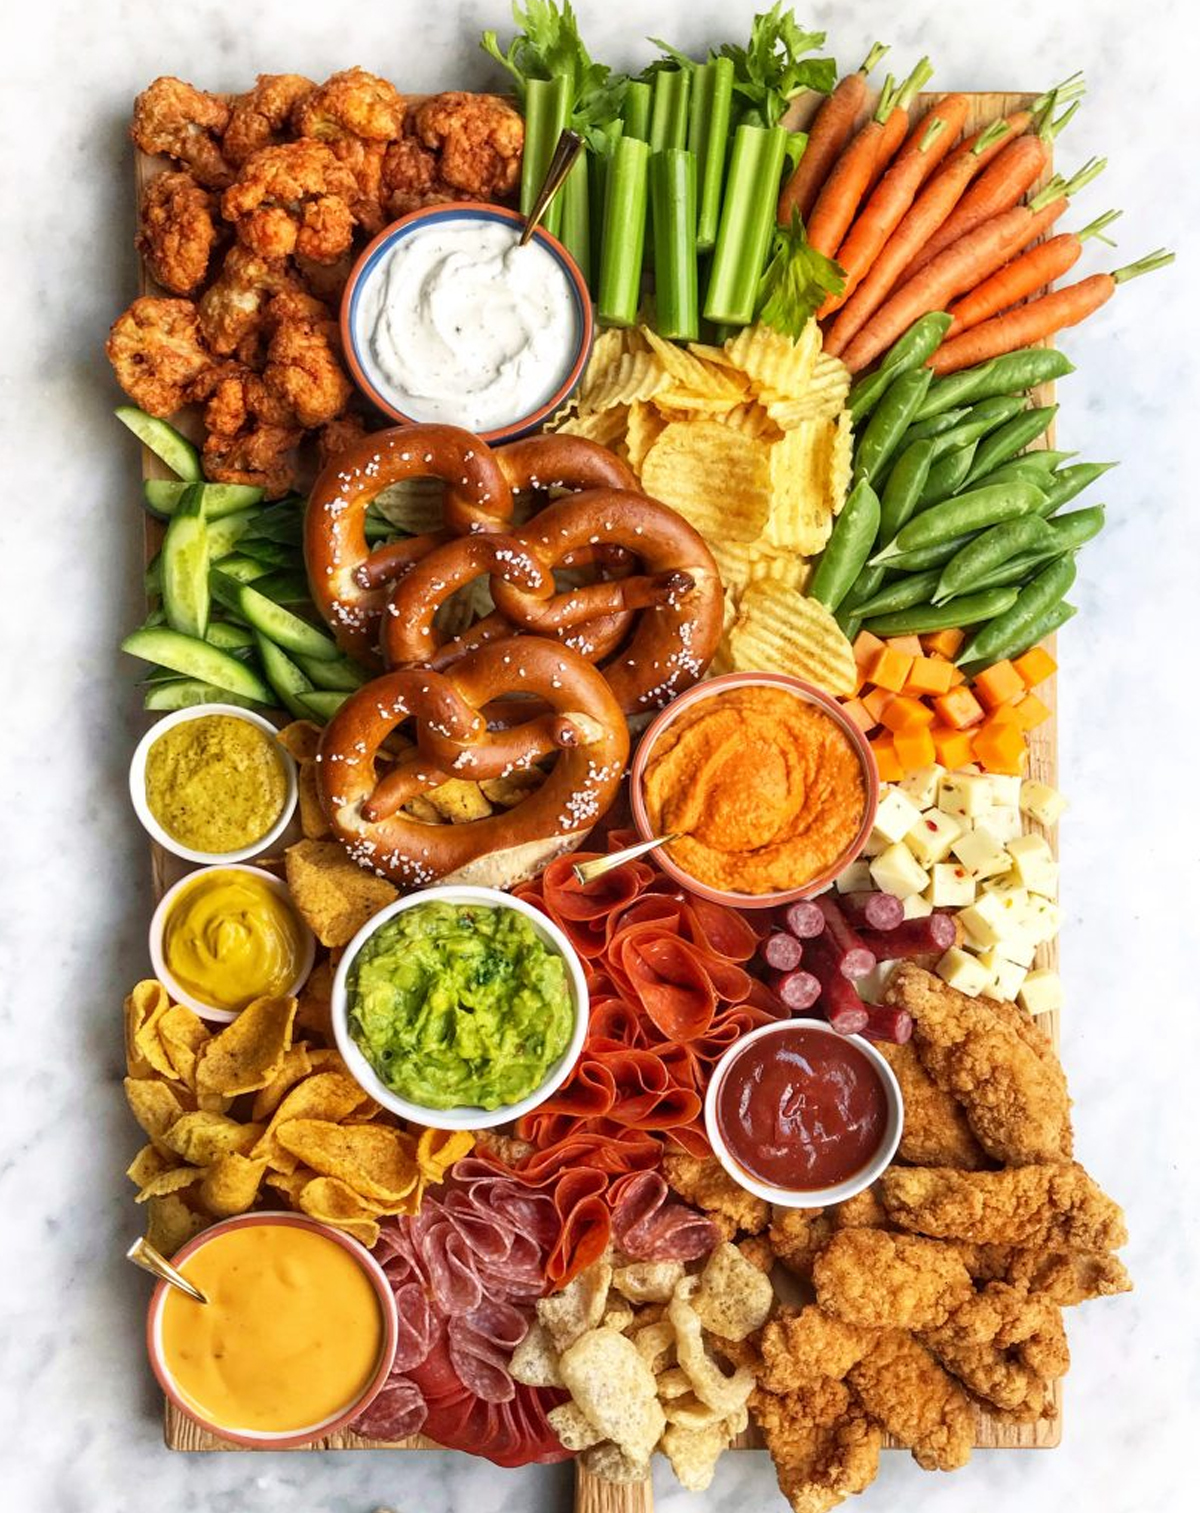 The Delicious Life's board is full of chips, veggies, meats, cheese, pretzels. and dips.